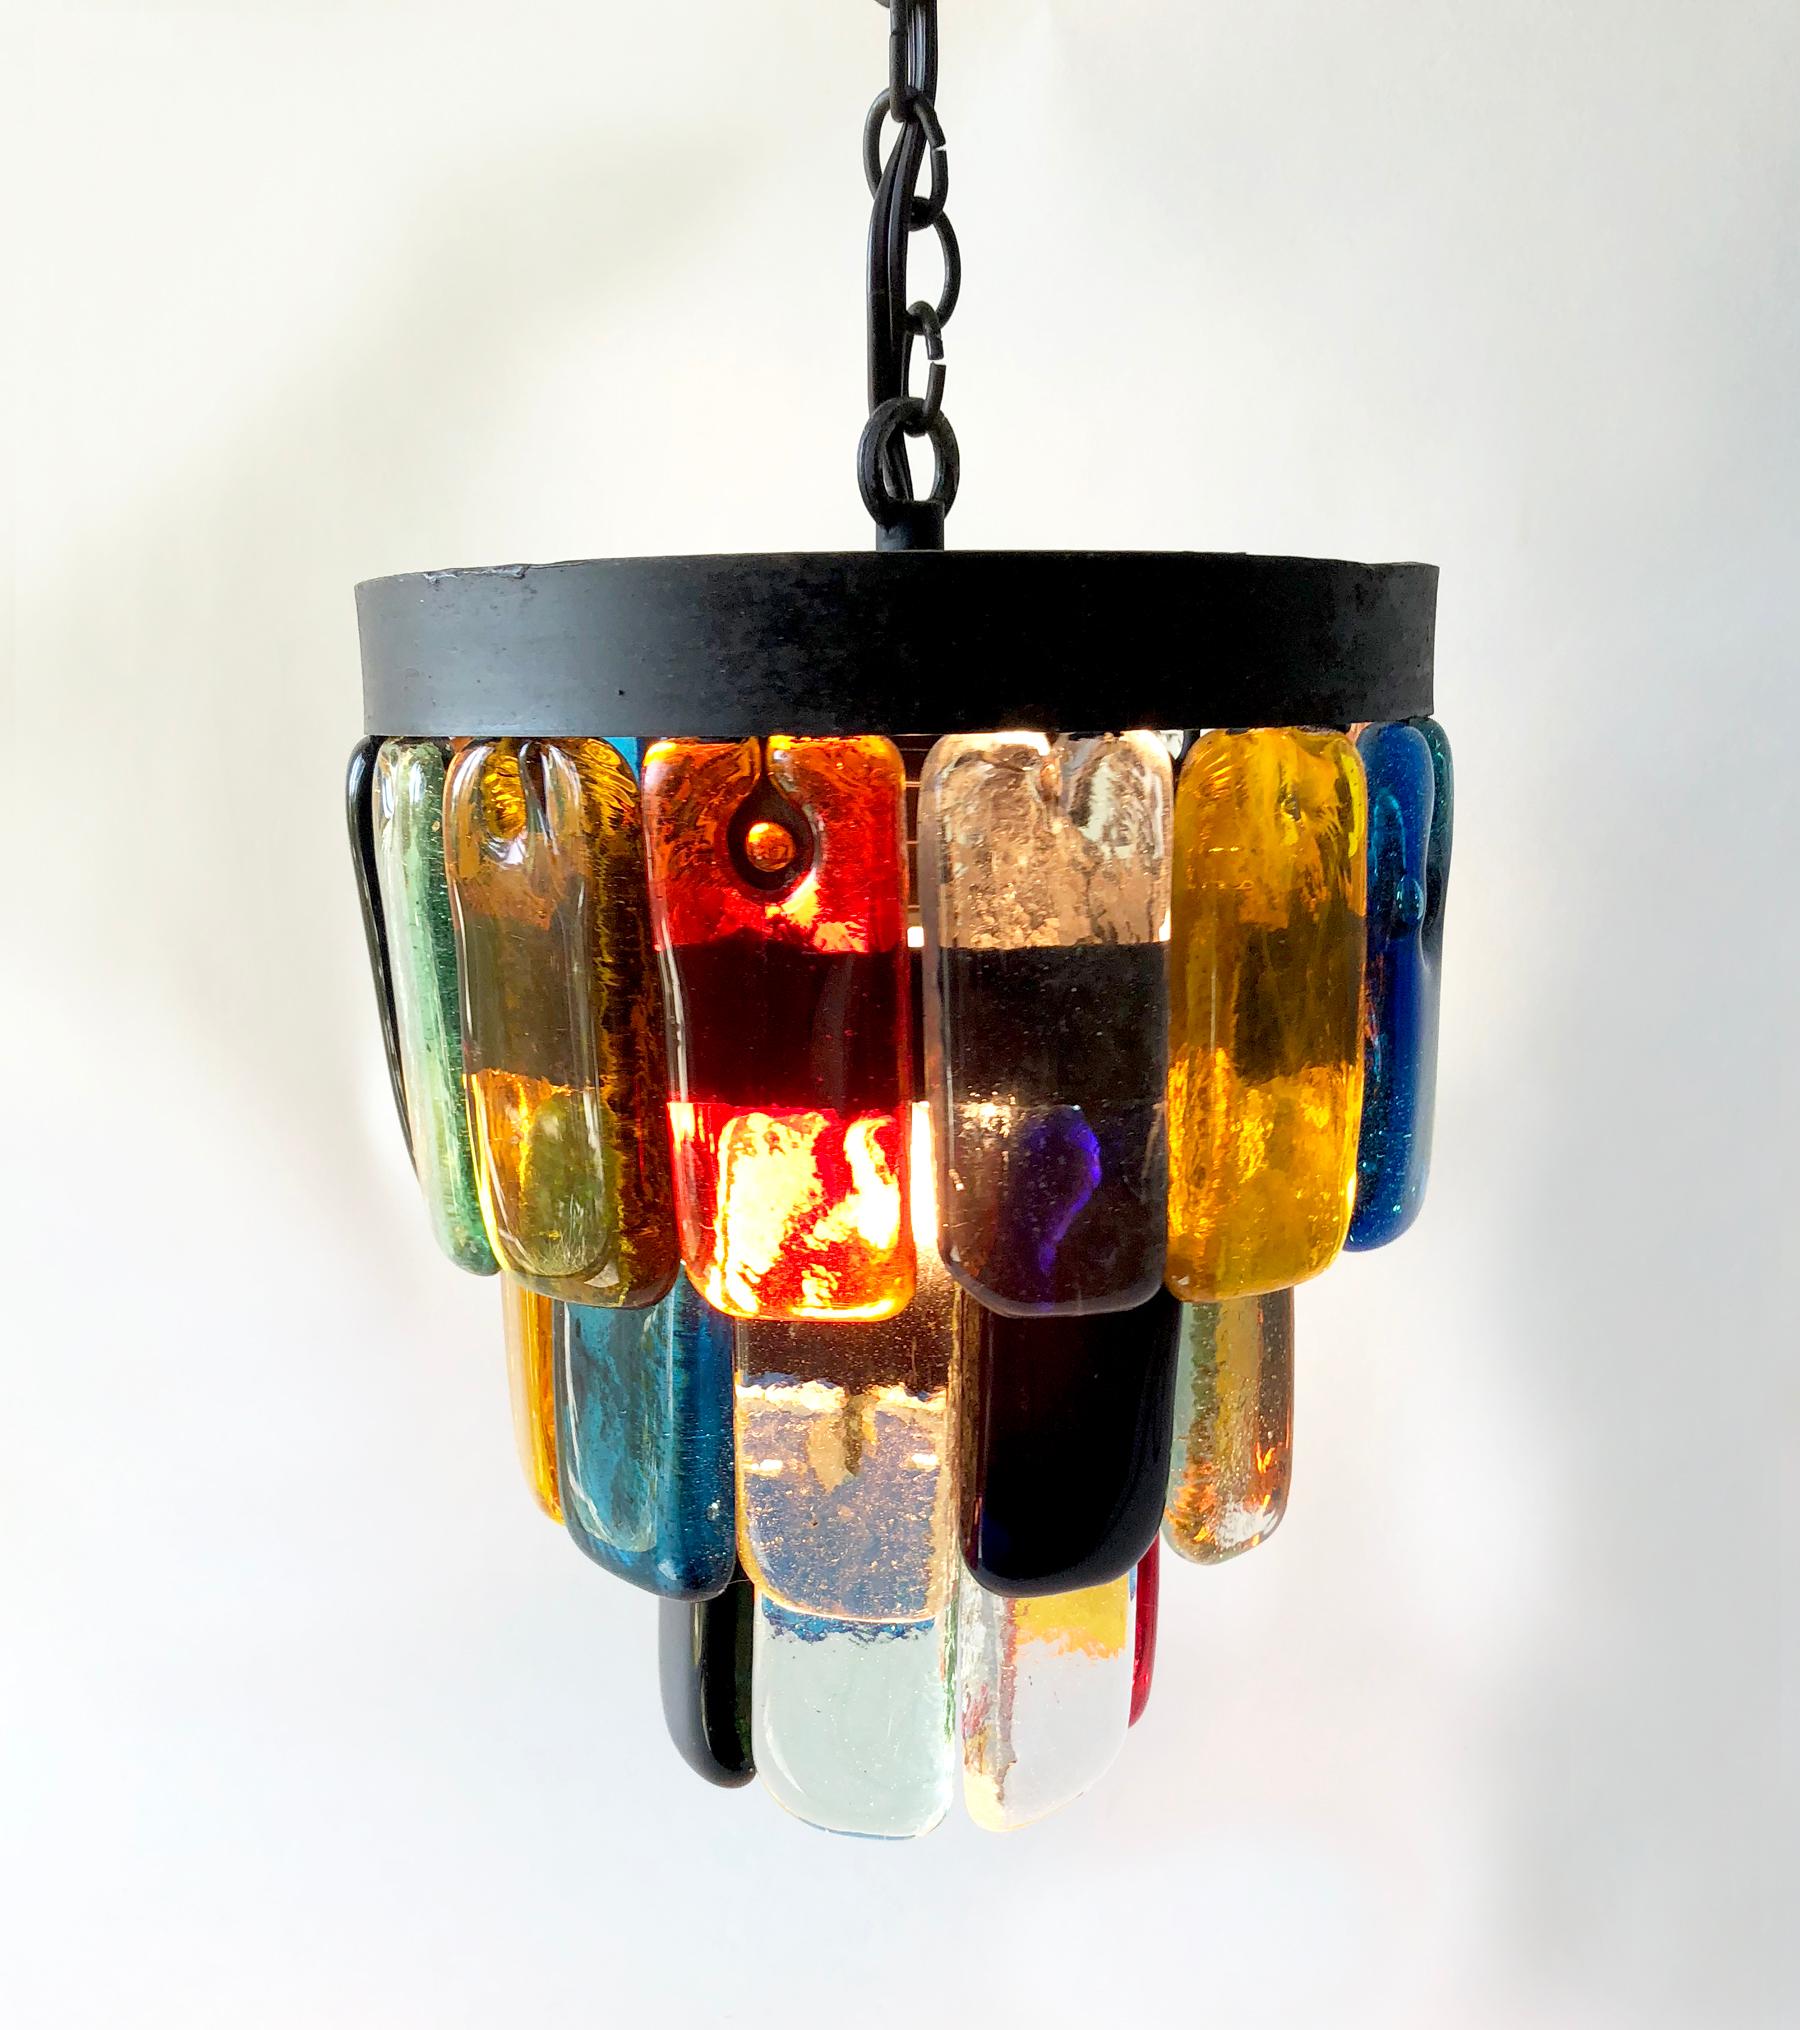 Mexican modern glass and iron hanging pendant lamp designed by Felipe Delfinger for Feders. Lamp is comprised of three tiers of multicolored glass panels attached to iron rings suspended with inner chains. Measuring 10